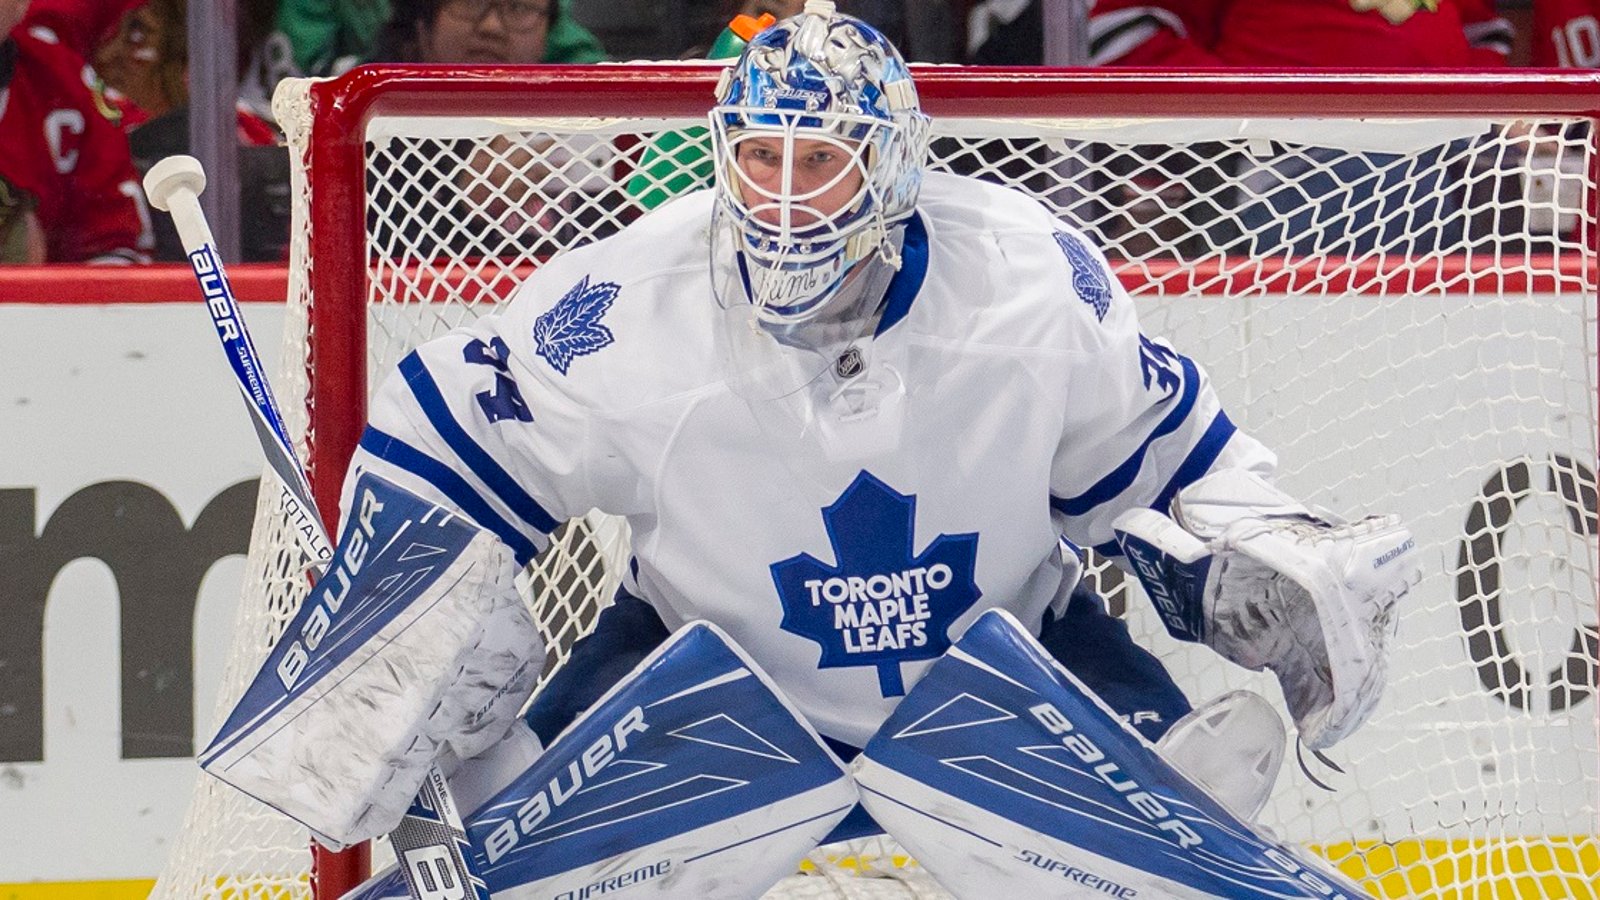 Leafs have reportedly refused to recognize former player.